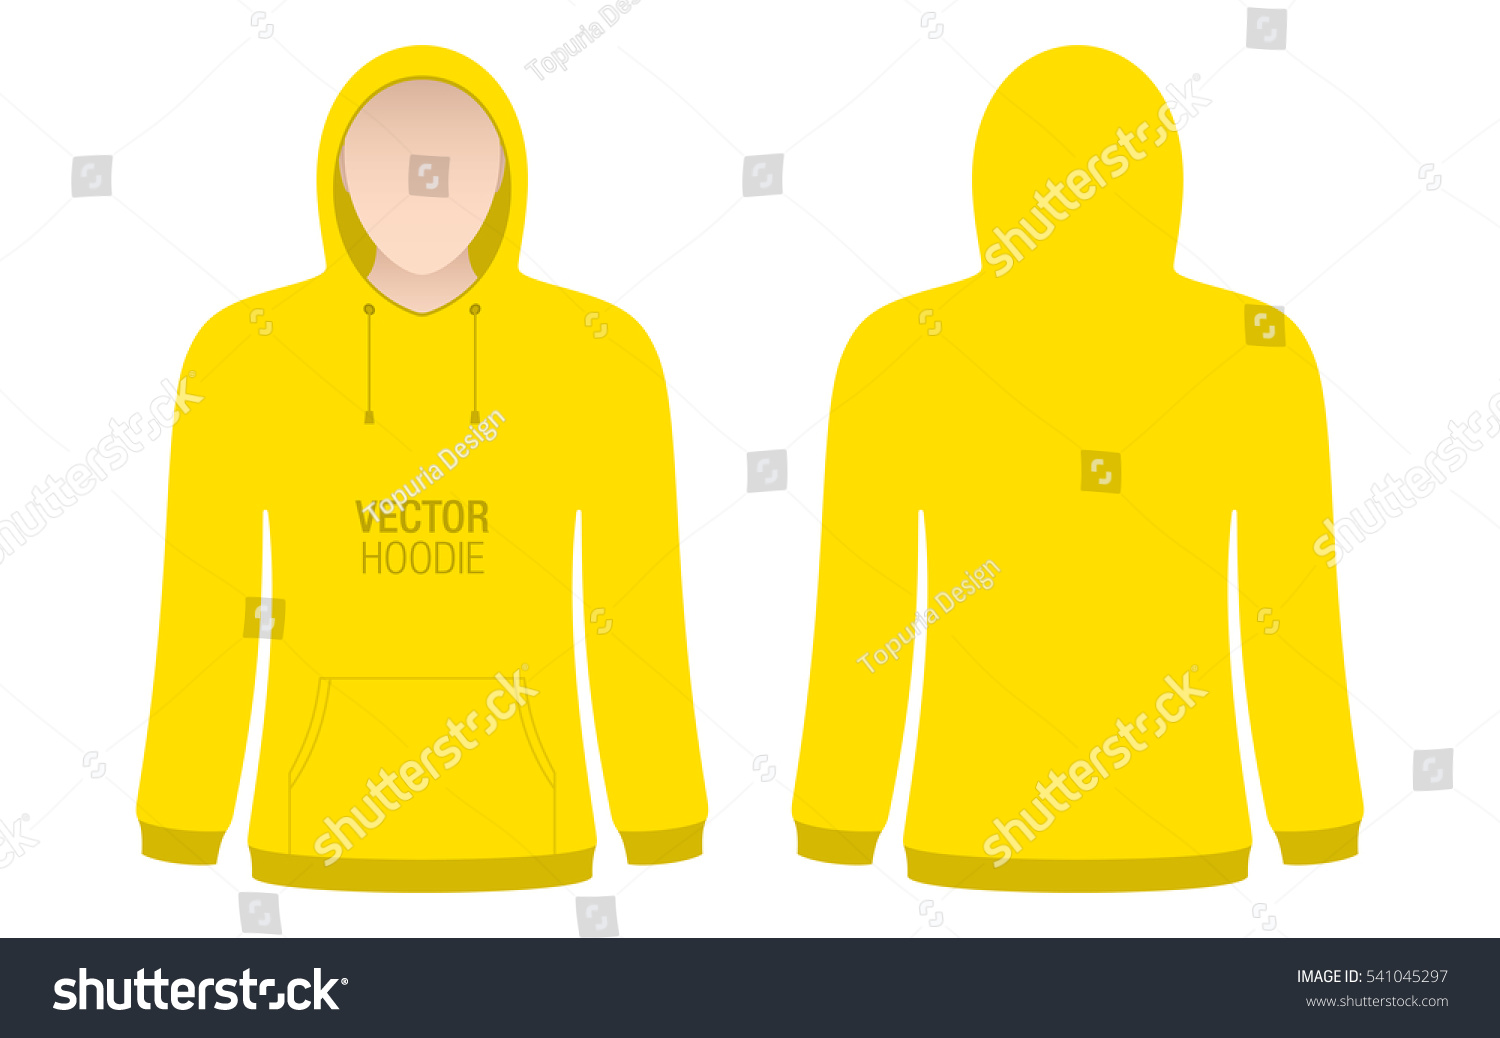 Yellow Vector Hoodie Template Model Woman Stock Vector Royalty Free 541045297